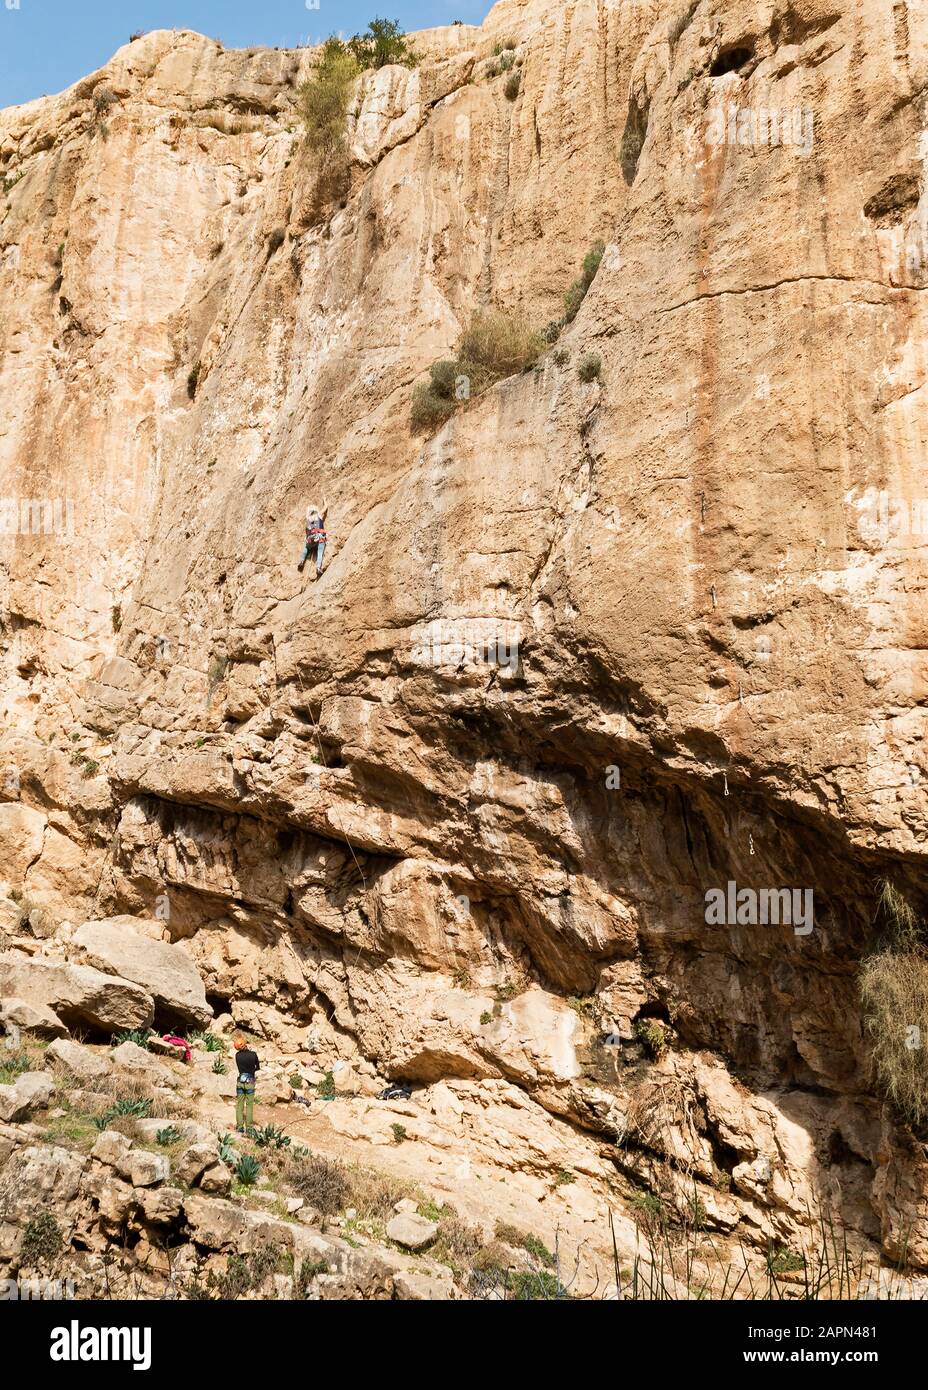 a rock climber scales a shear limestone cliff in wadi qelt near ein prat in the judaean mountains in the west bank with her belayer in the foreground Stock Photo